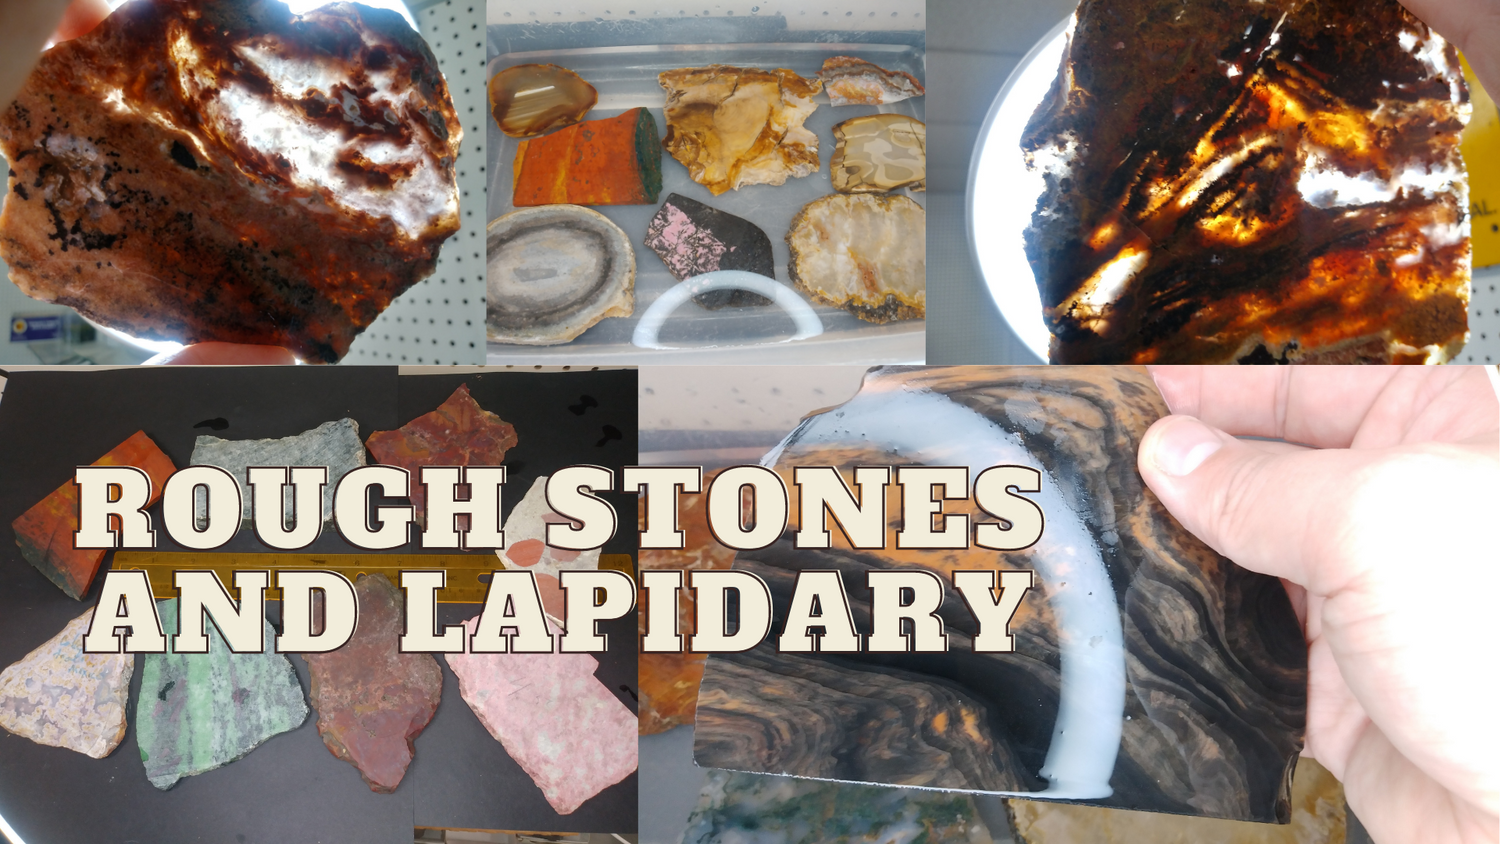 Rough Stones and Lapidary